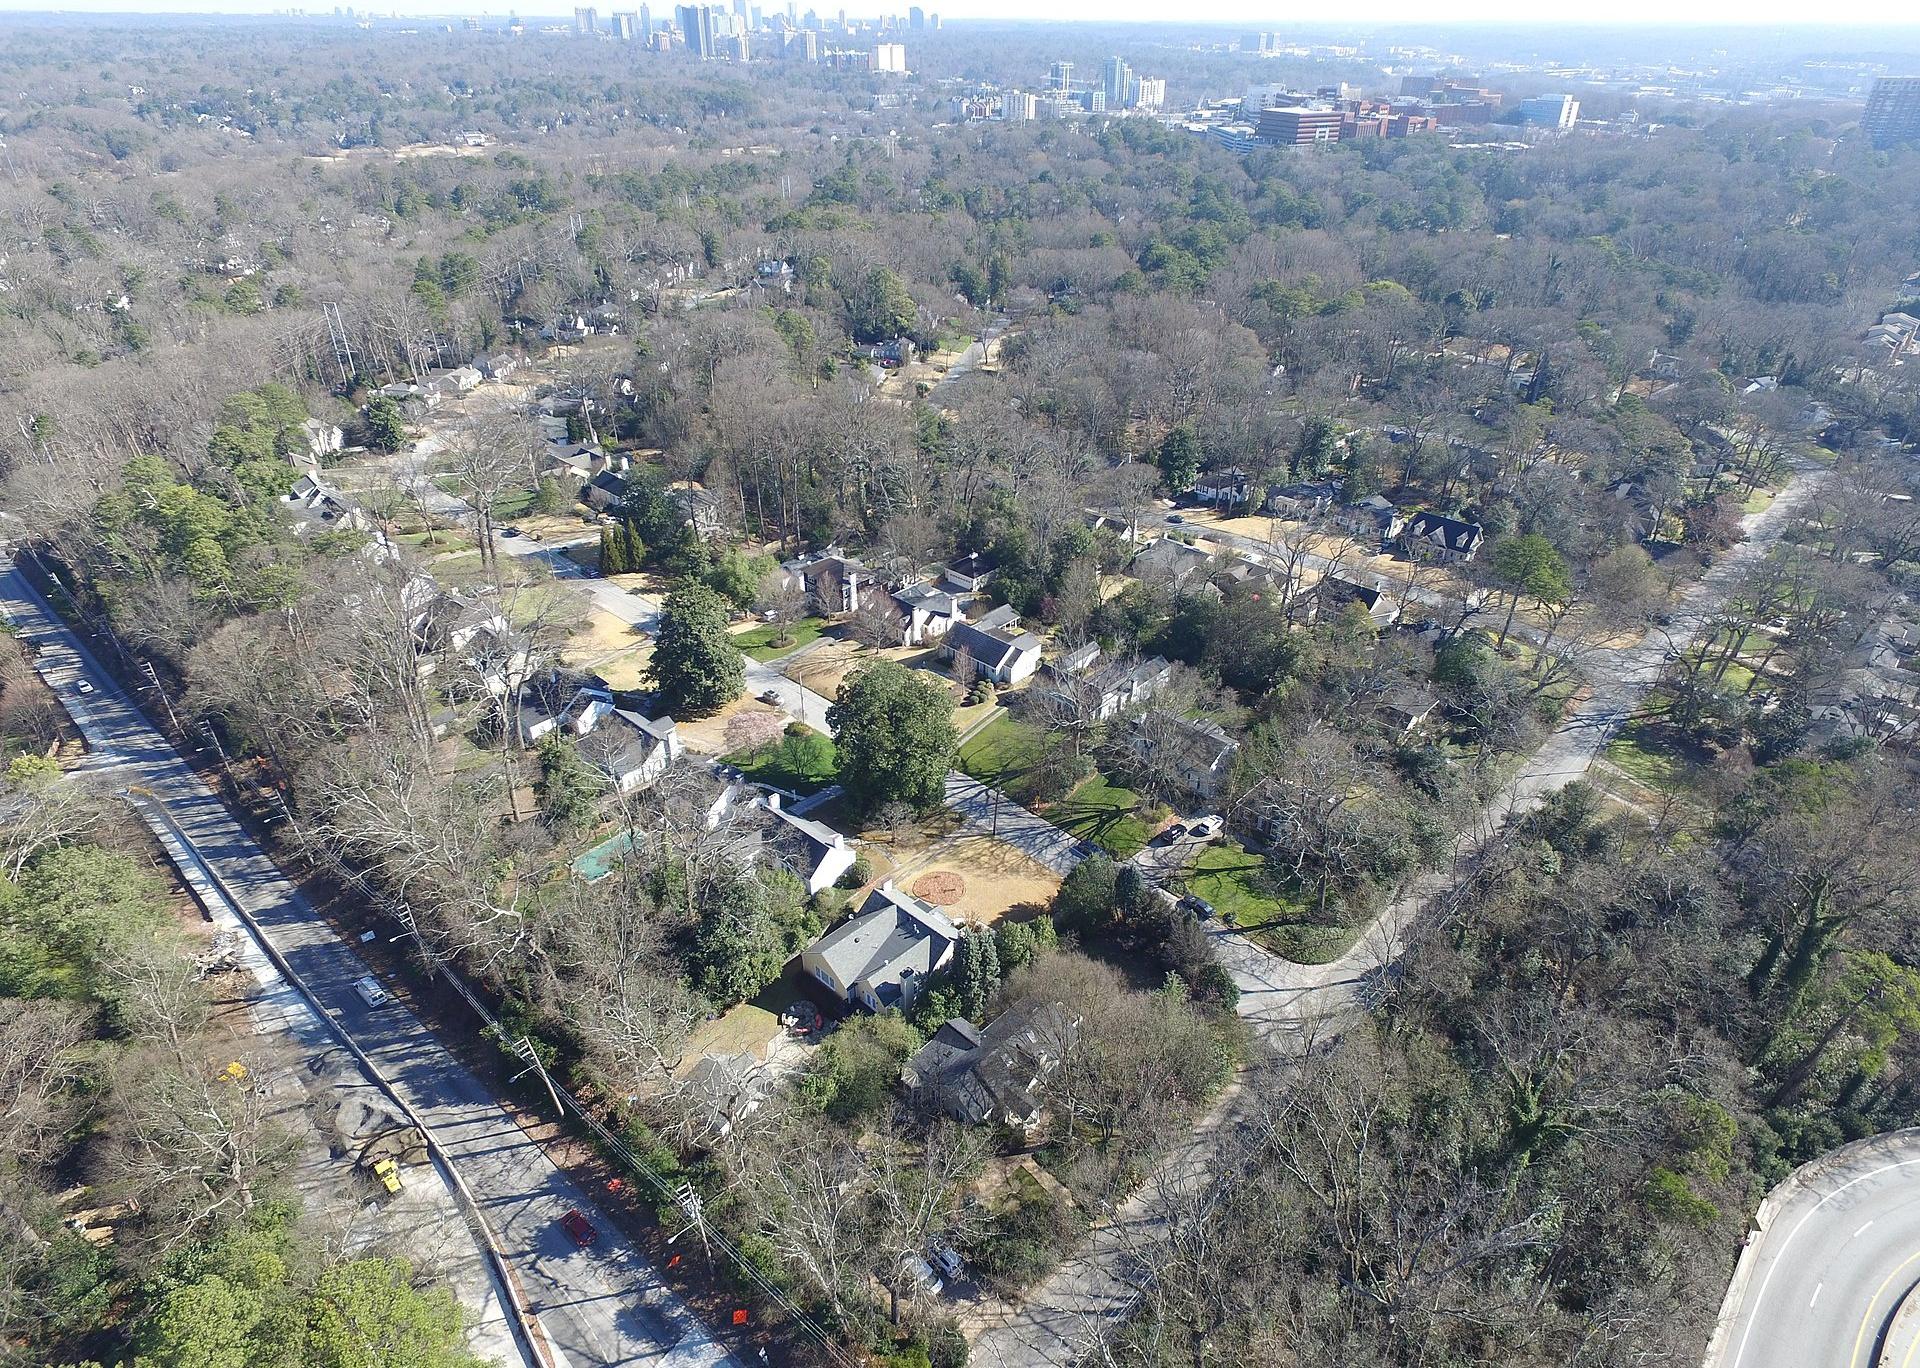 Collier Hills from Northside Drive / Echota intersection looking towards Buckhead